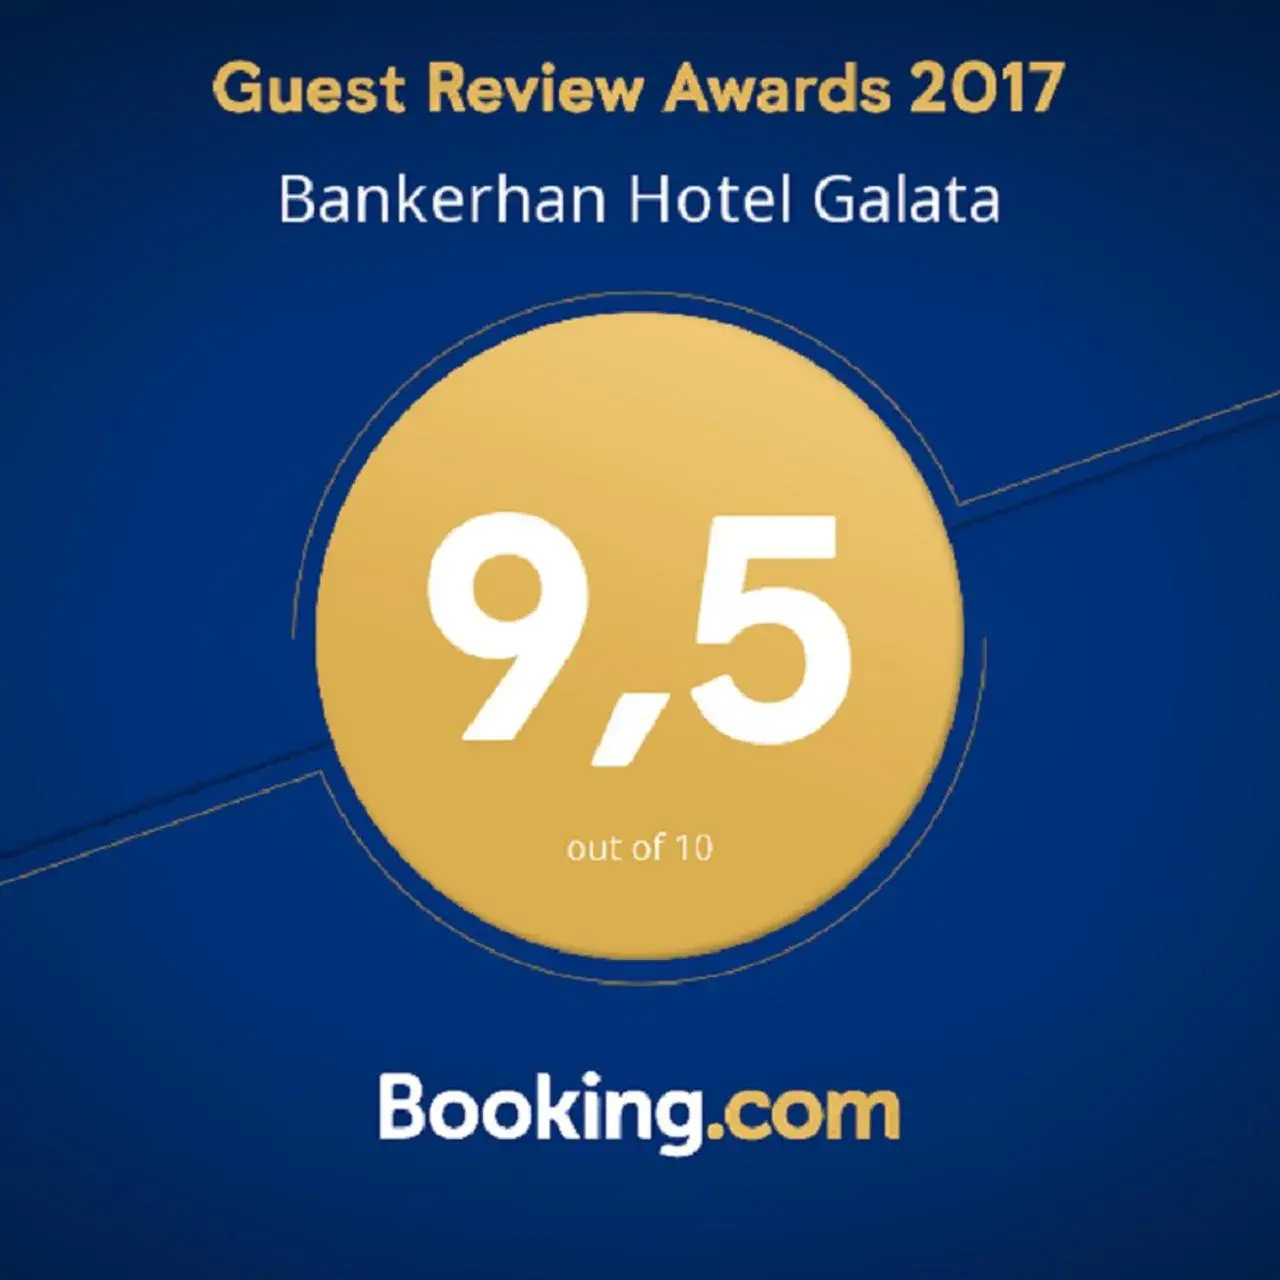 Certificate/Award in Bankerhan Hotel Galata - Adults Only Special Category